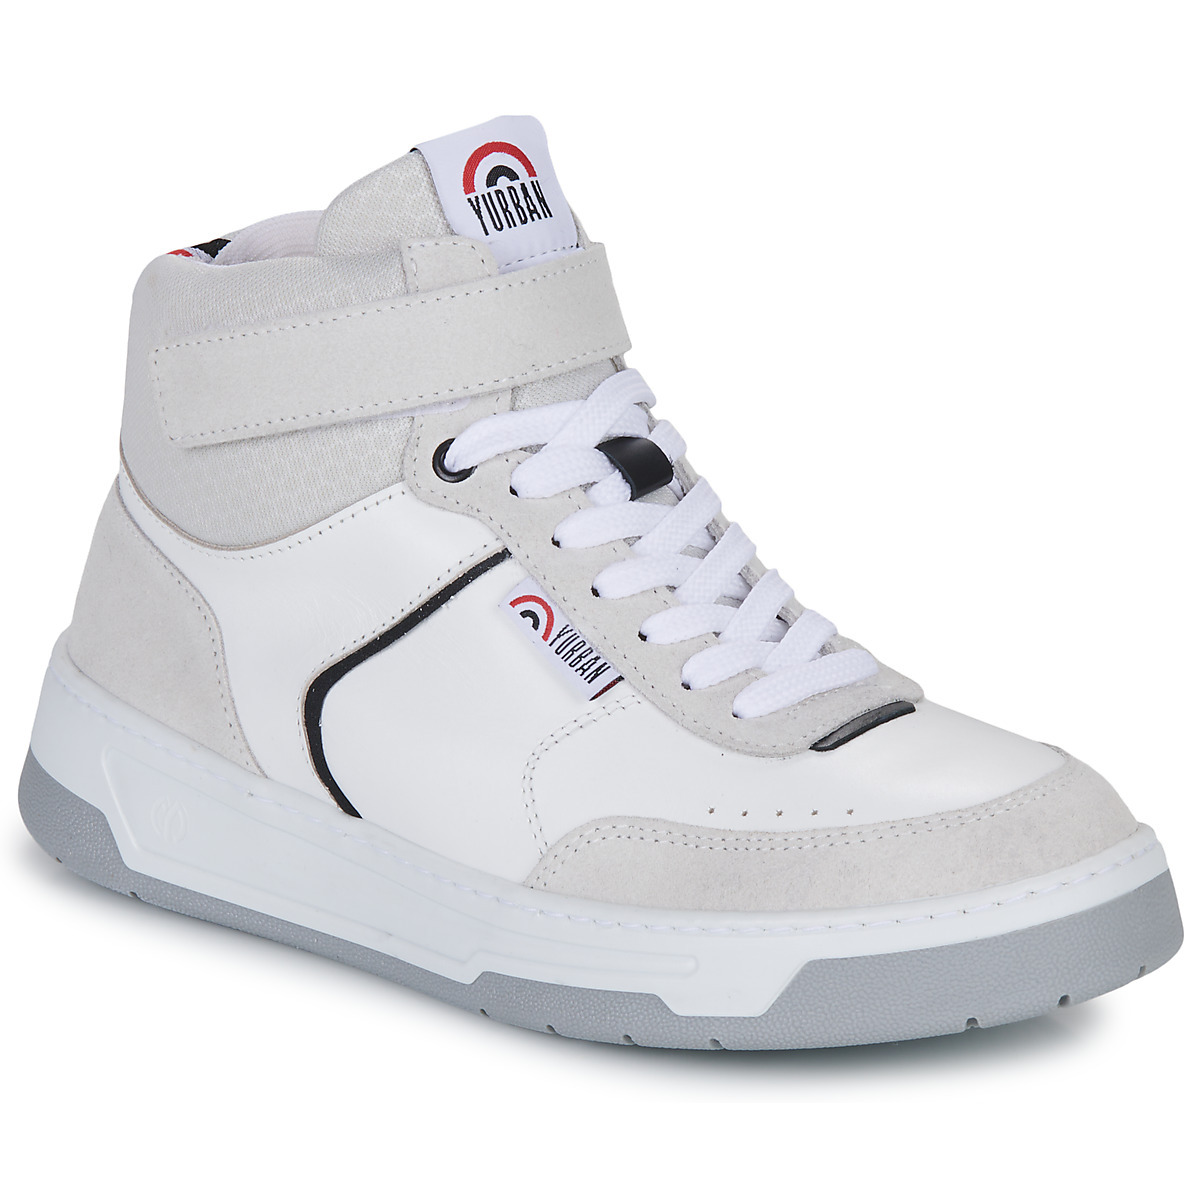 Yurban Men's Sneakers in White from Spartoo GOOFASH